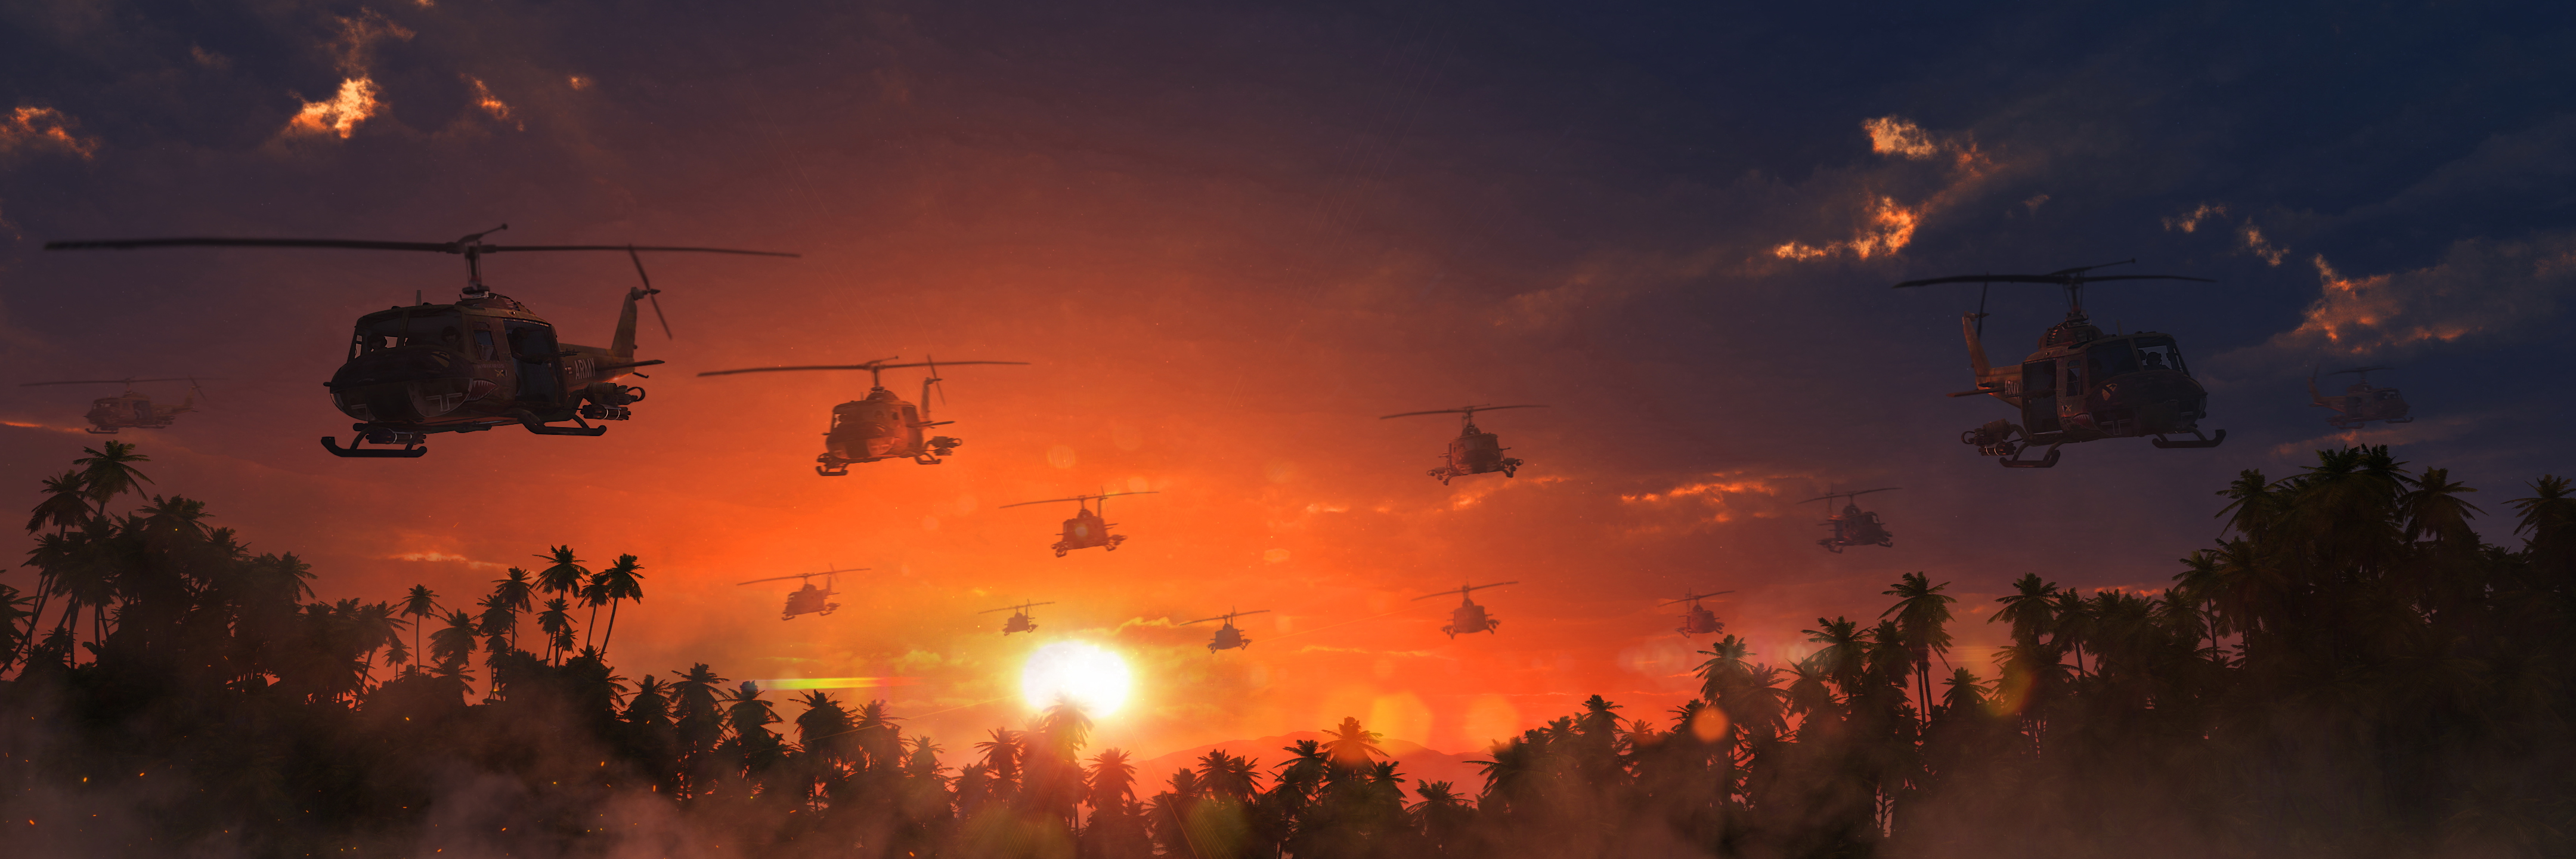 Helicopters.jpg